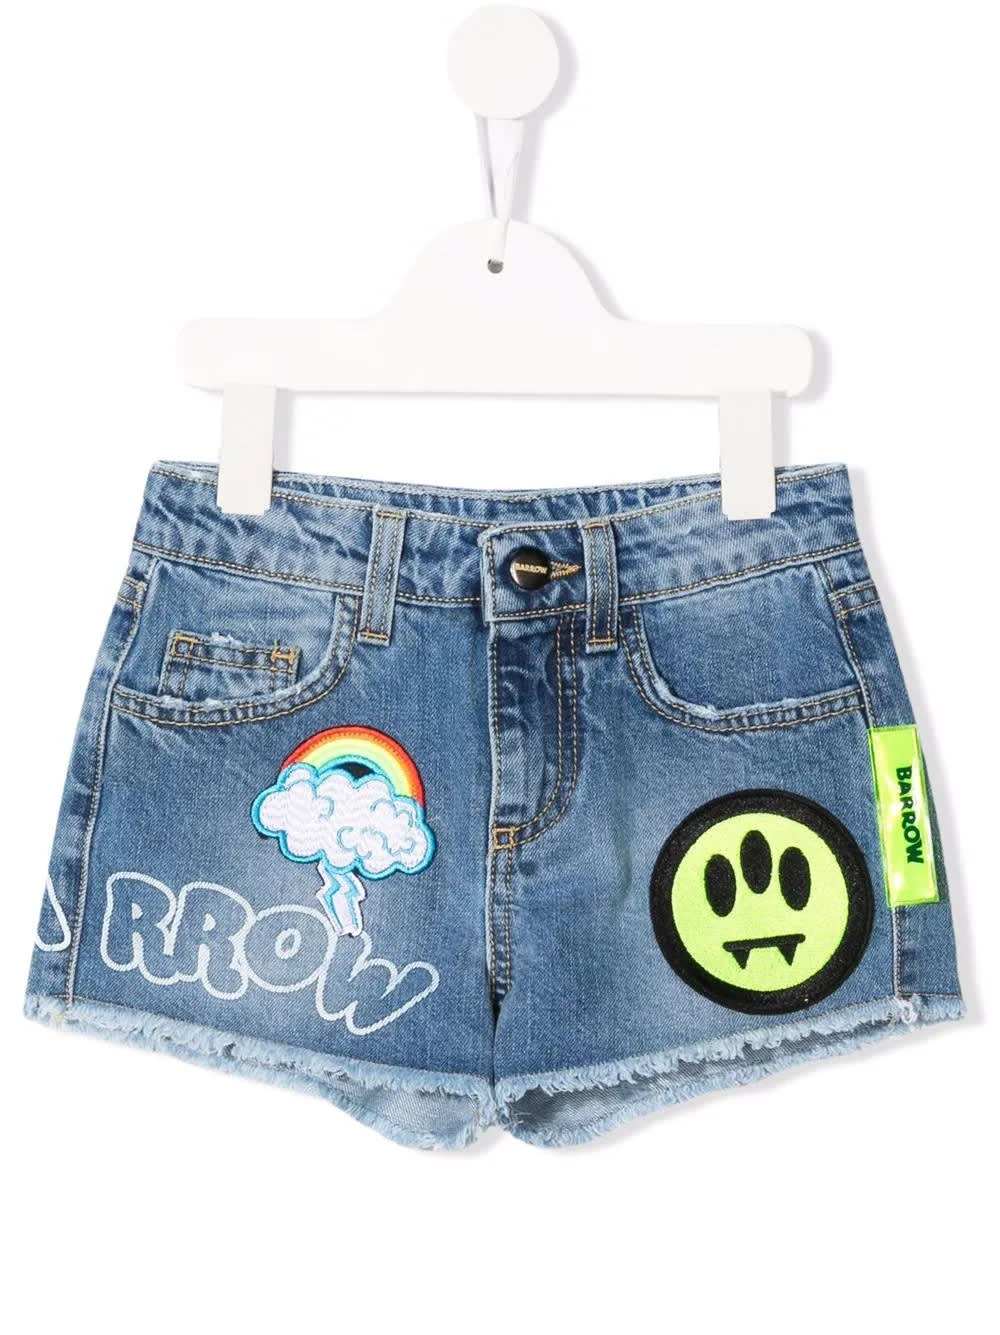 Barrow Kids Shorts In Blue Denim With Patches